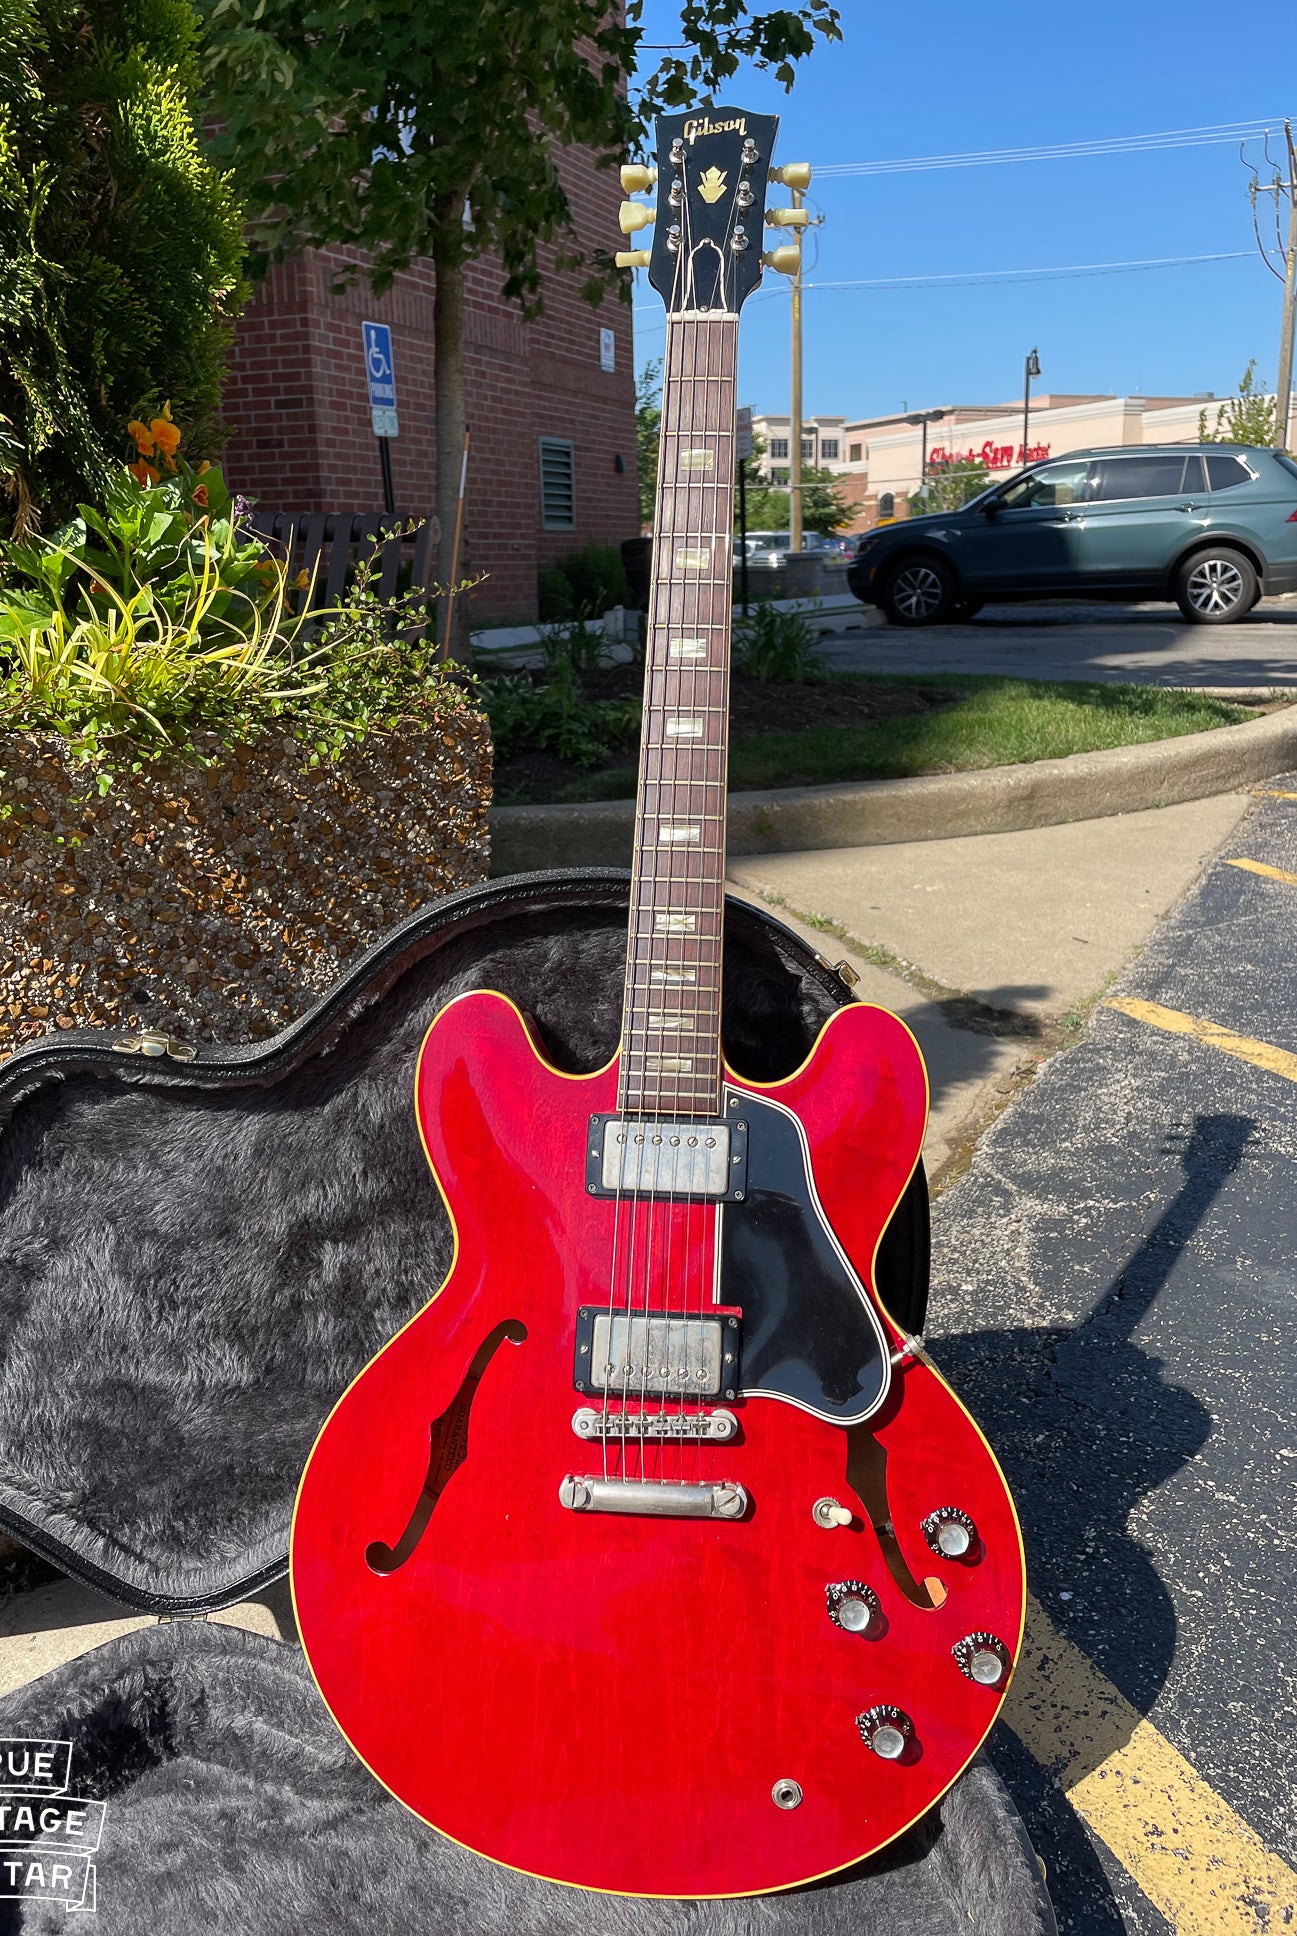 Gibson ES-335 1963 Cherry Red guitar in Illinois